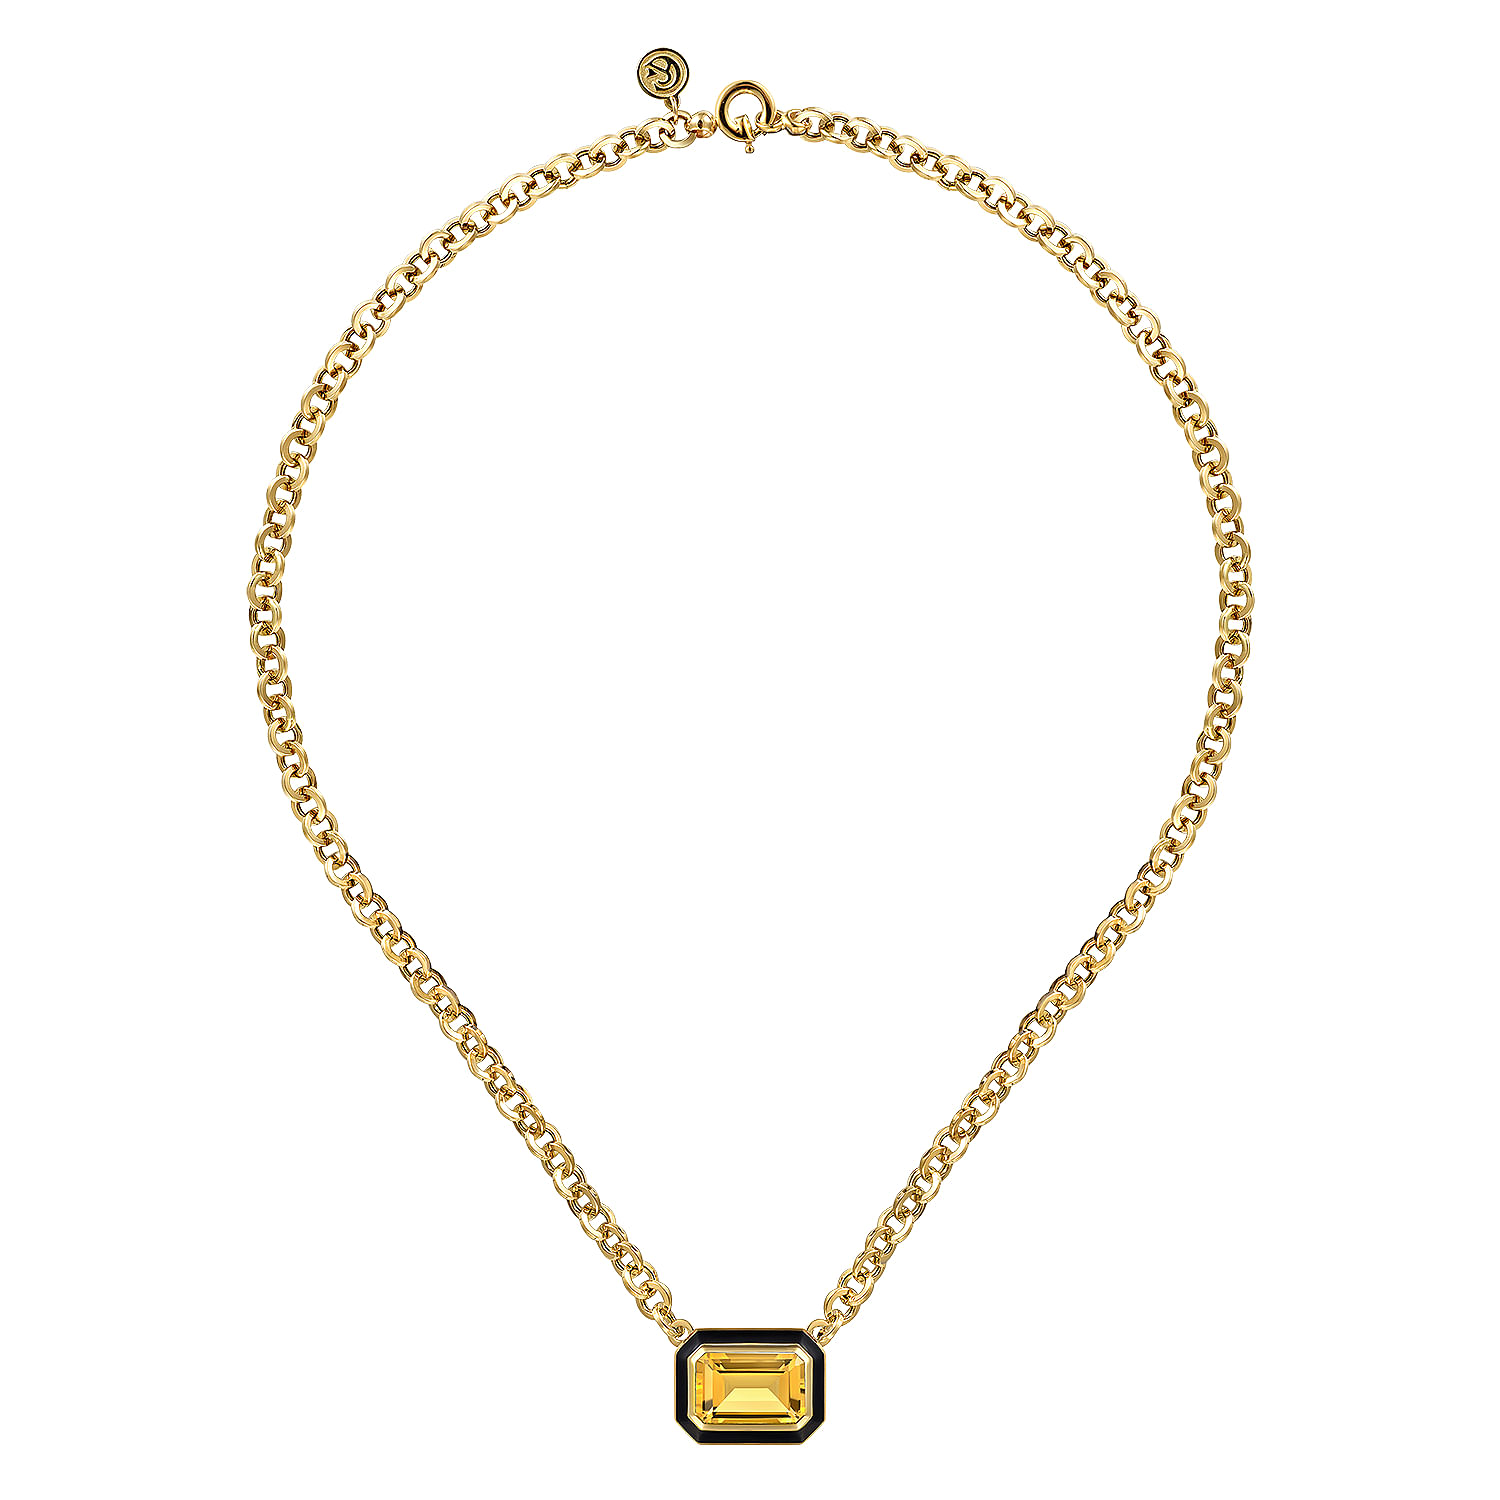 14K Yellow Gold Citrine Emerald Cut Necklace With Flower Pattern J-Back and Black Enamel